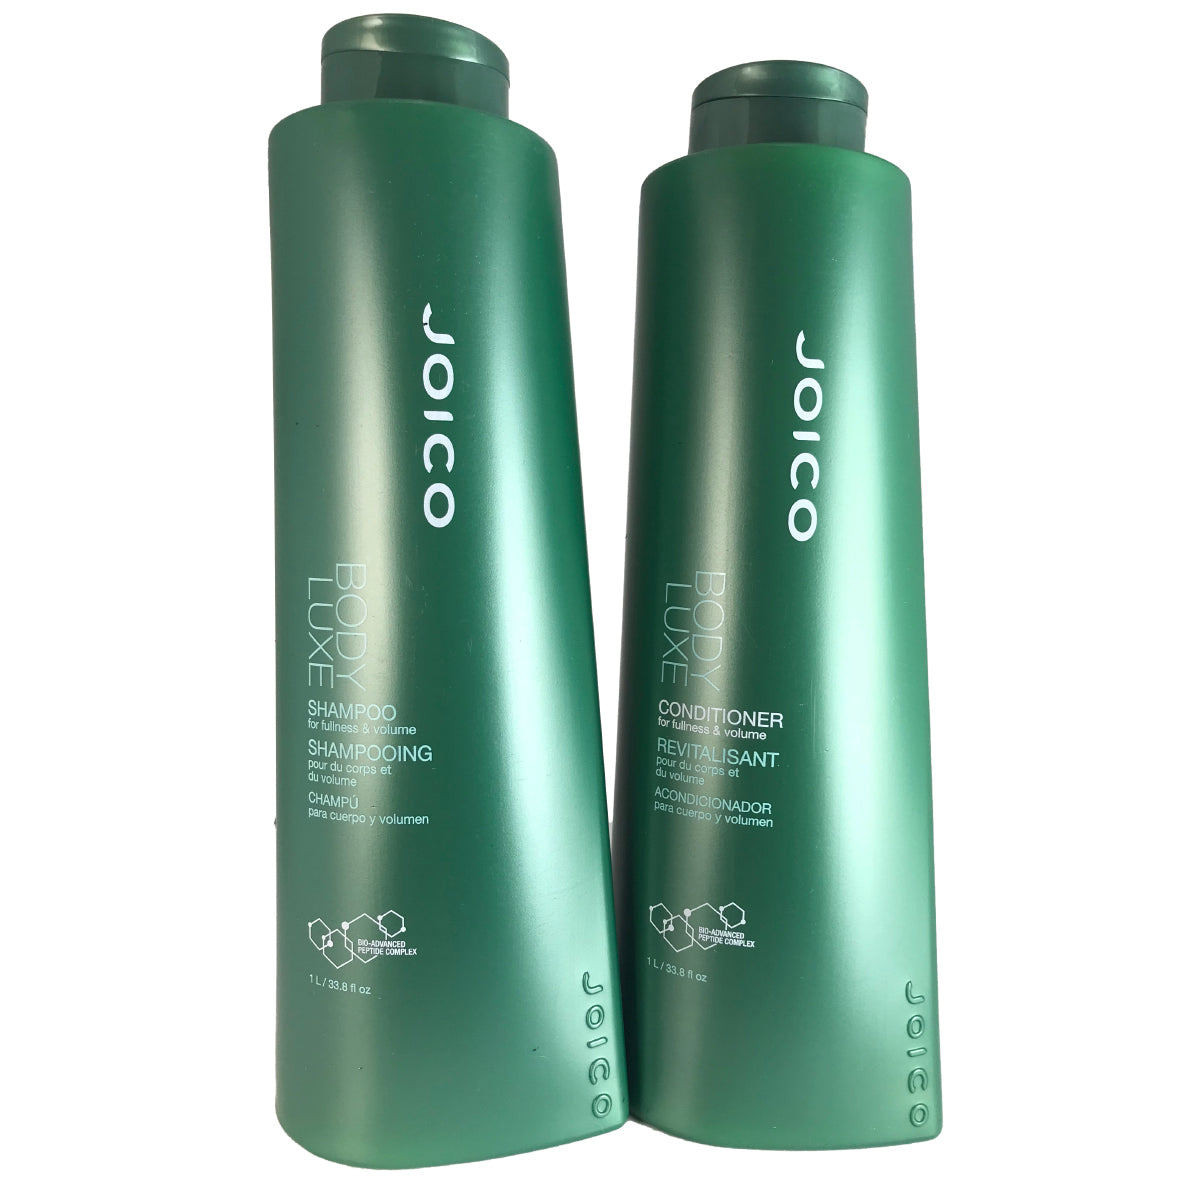 Joico Body Luxe Hair Shampoo and Conditoner Duo 33.8 oz Each For Fullness and Volume